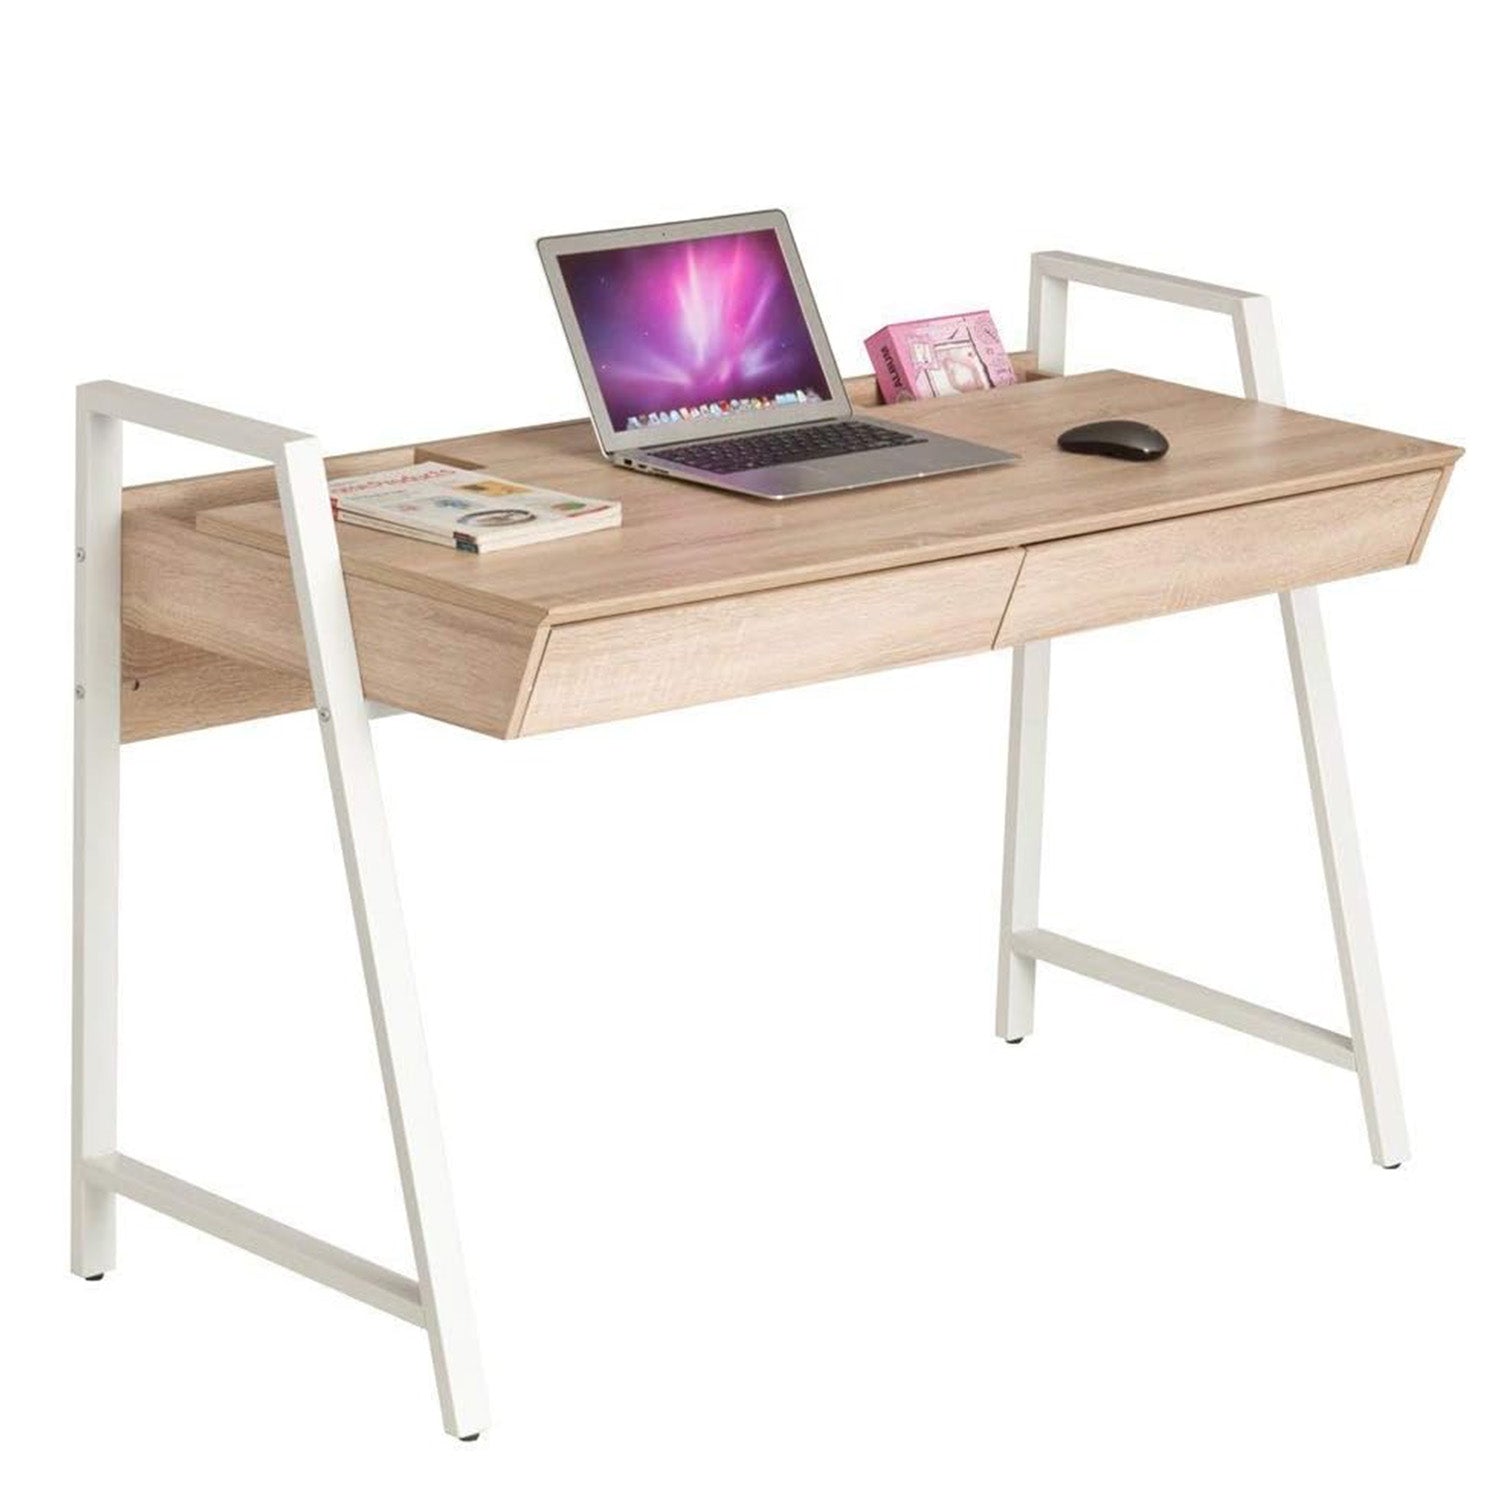 50" Computer Desk with 2 Drawers Wood Home Office Desk Work Table, White